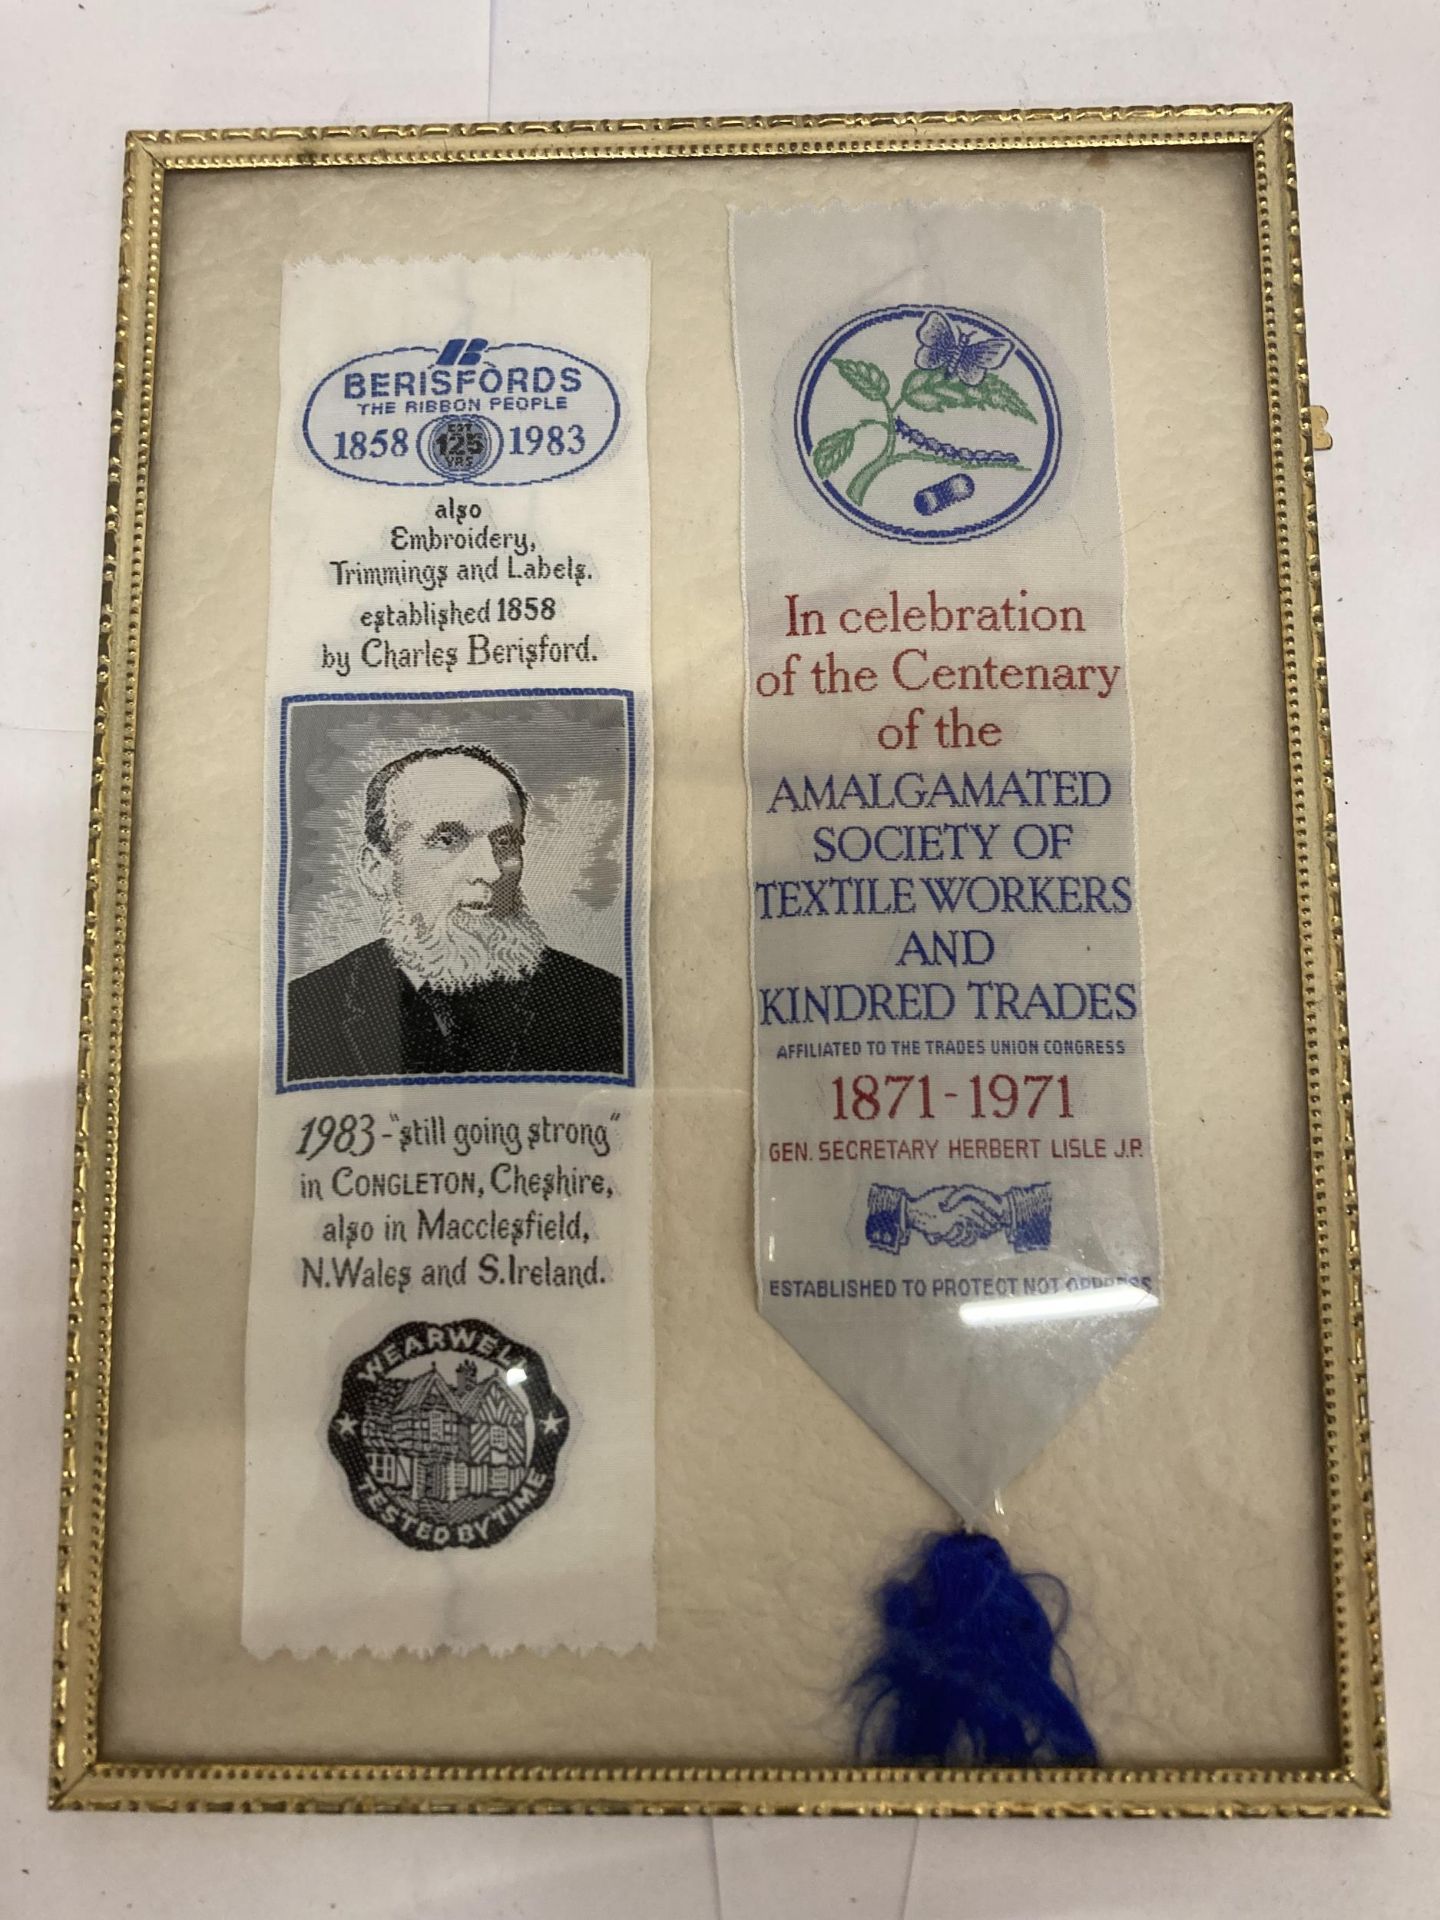 A FRAMED SILK RIBBONS AMALGAMATED SOCIETY OF TEXTILE WORKERS AND BERISFORDS EMBROIDERY RIBBON AWARD